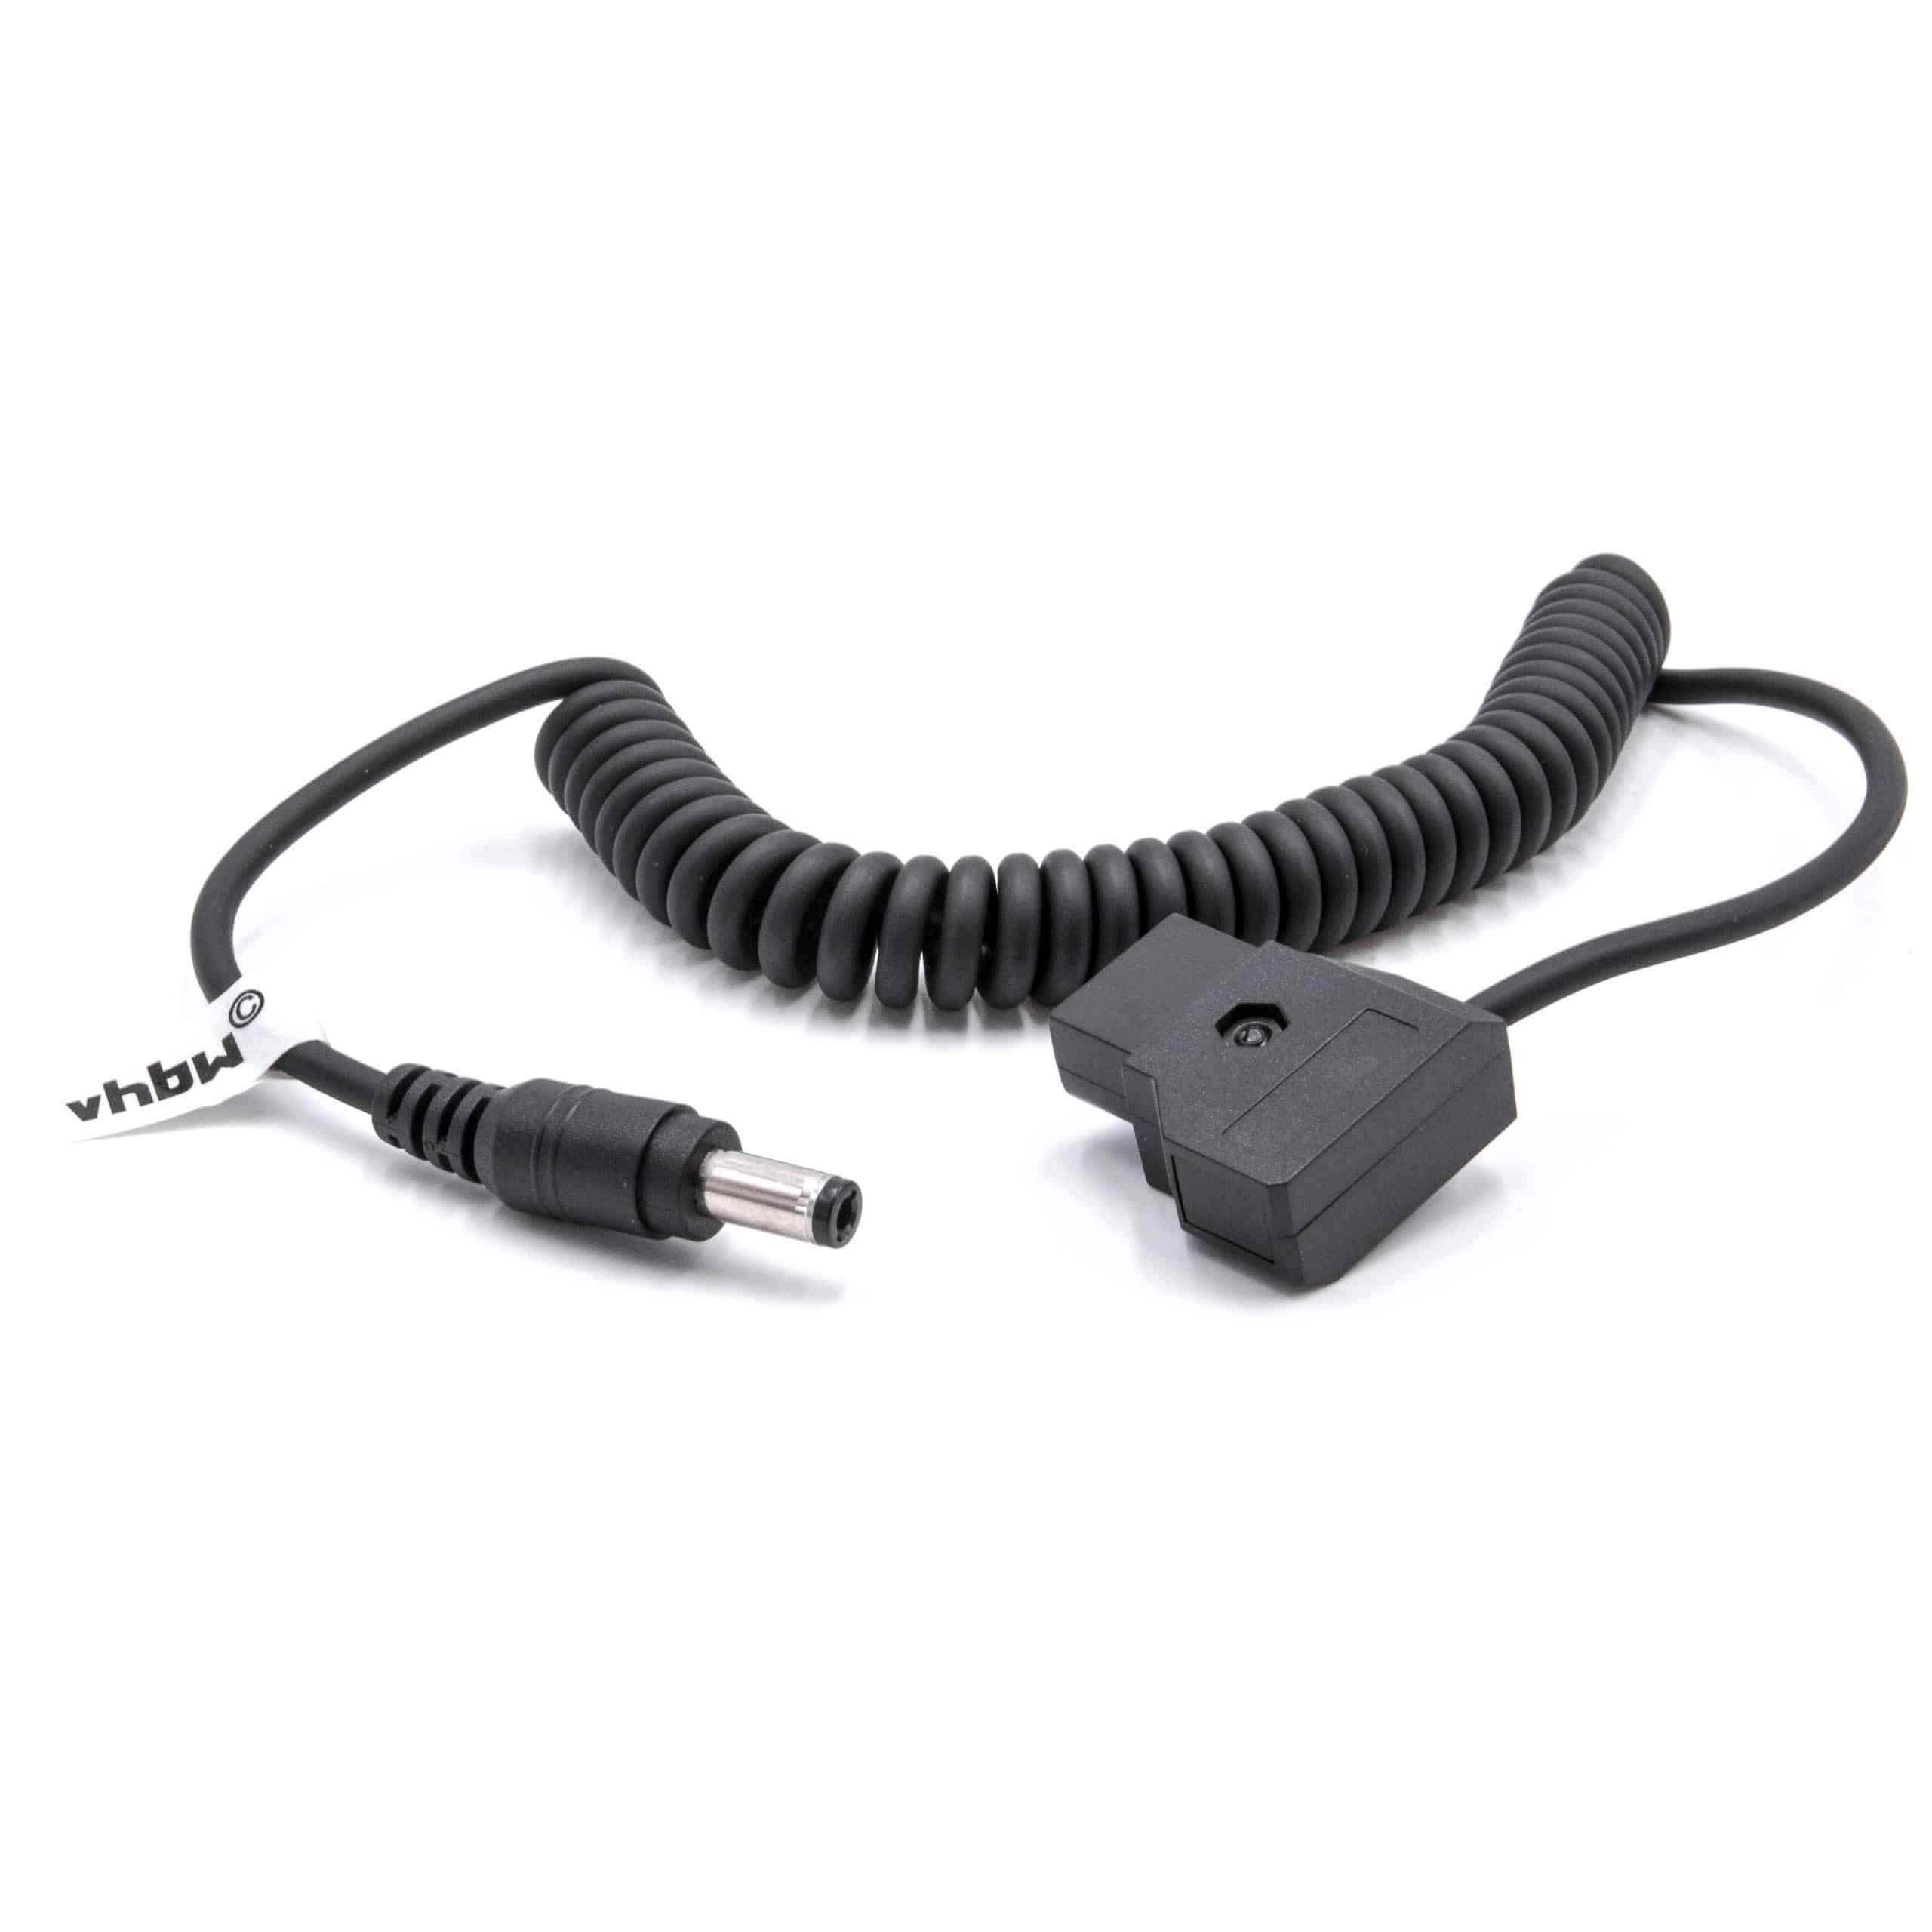 Adapter Cable D-Tap (male) to LED Power Supply suitable for Anton Bauer D-Tap, Dionic Camera - Black